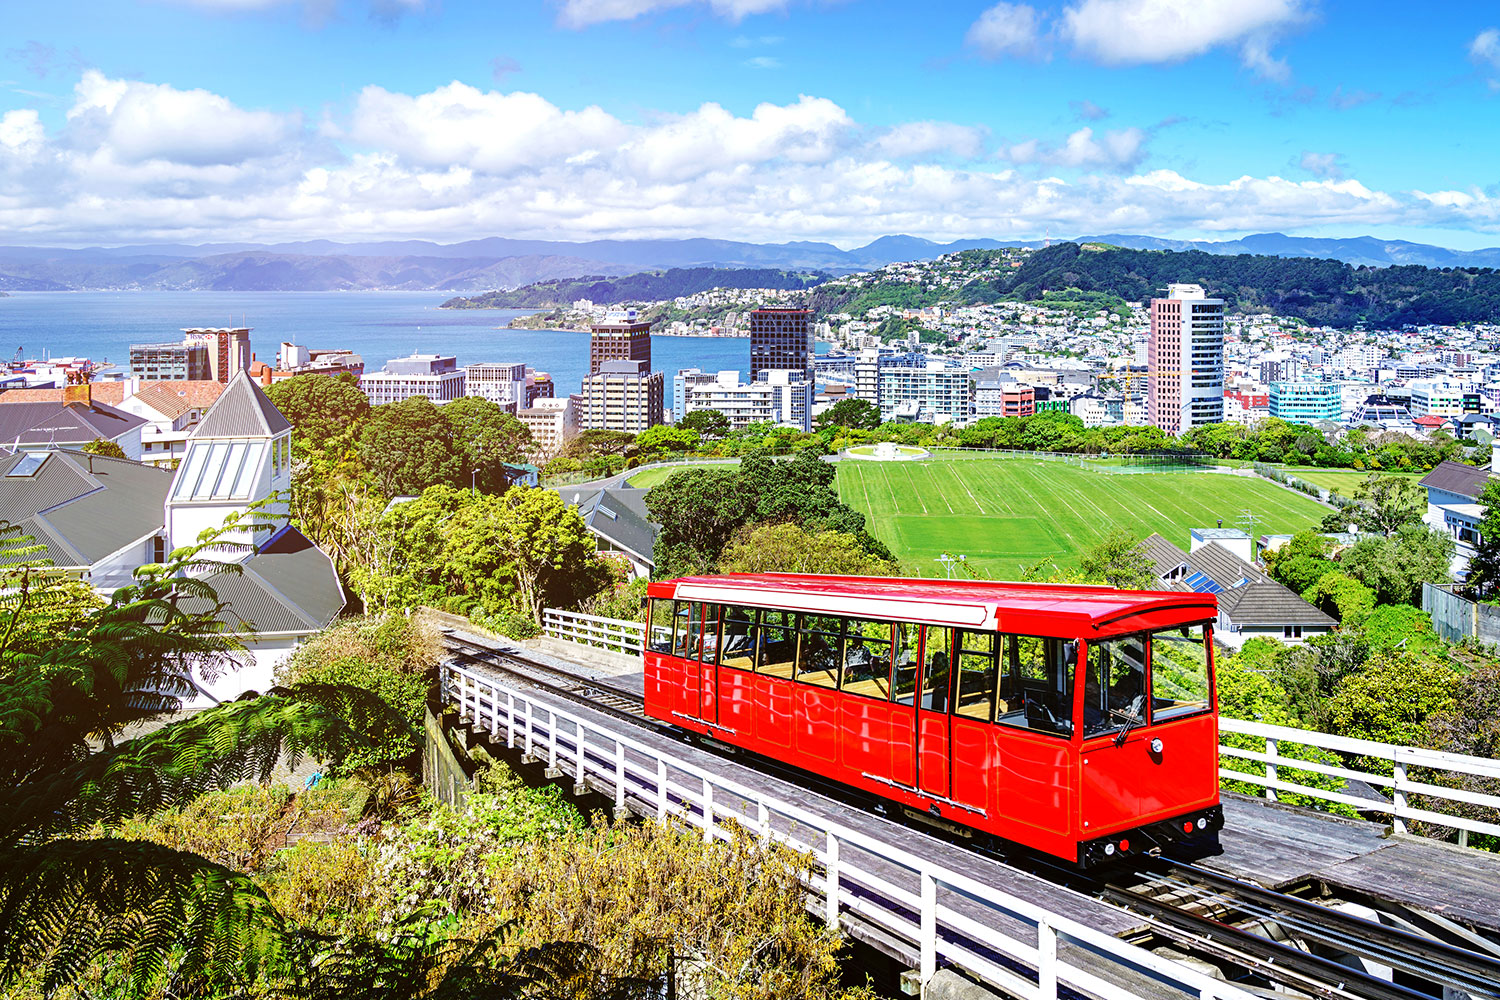 For a mere $4 you can purchase a one-way ticket to Kelburn on the iconic Wellington Cable Car.